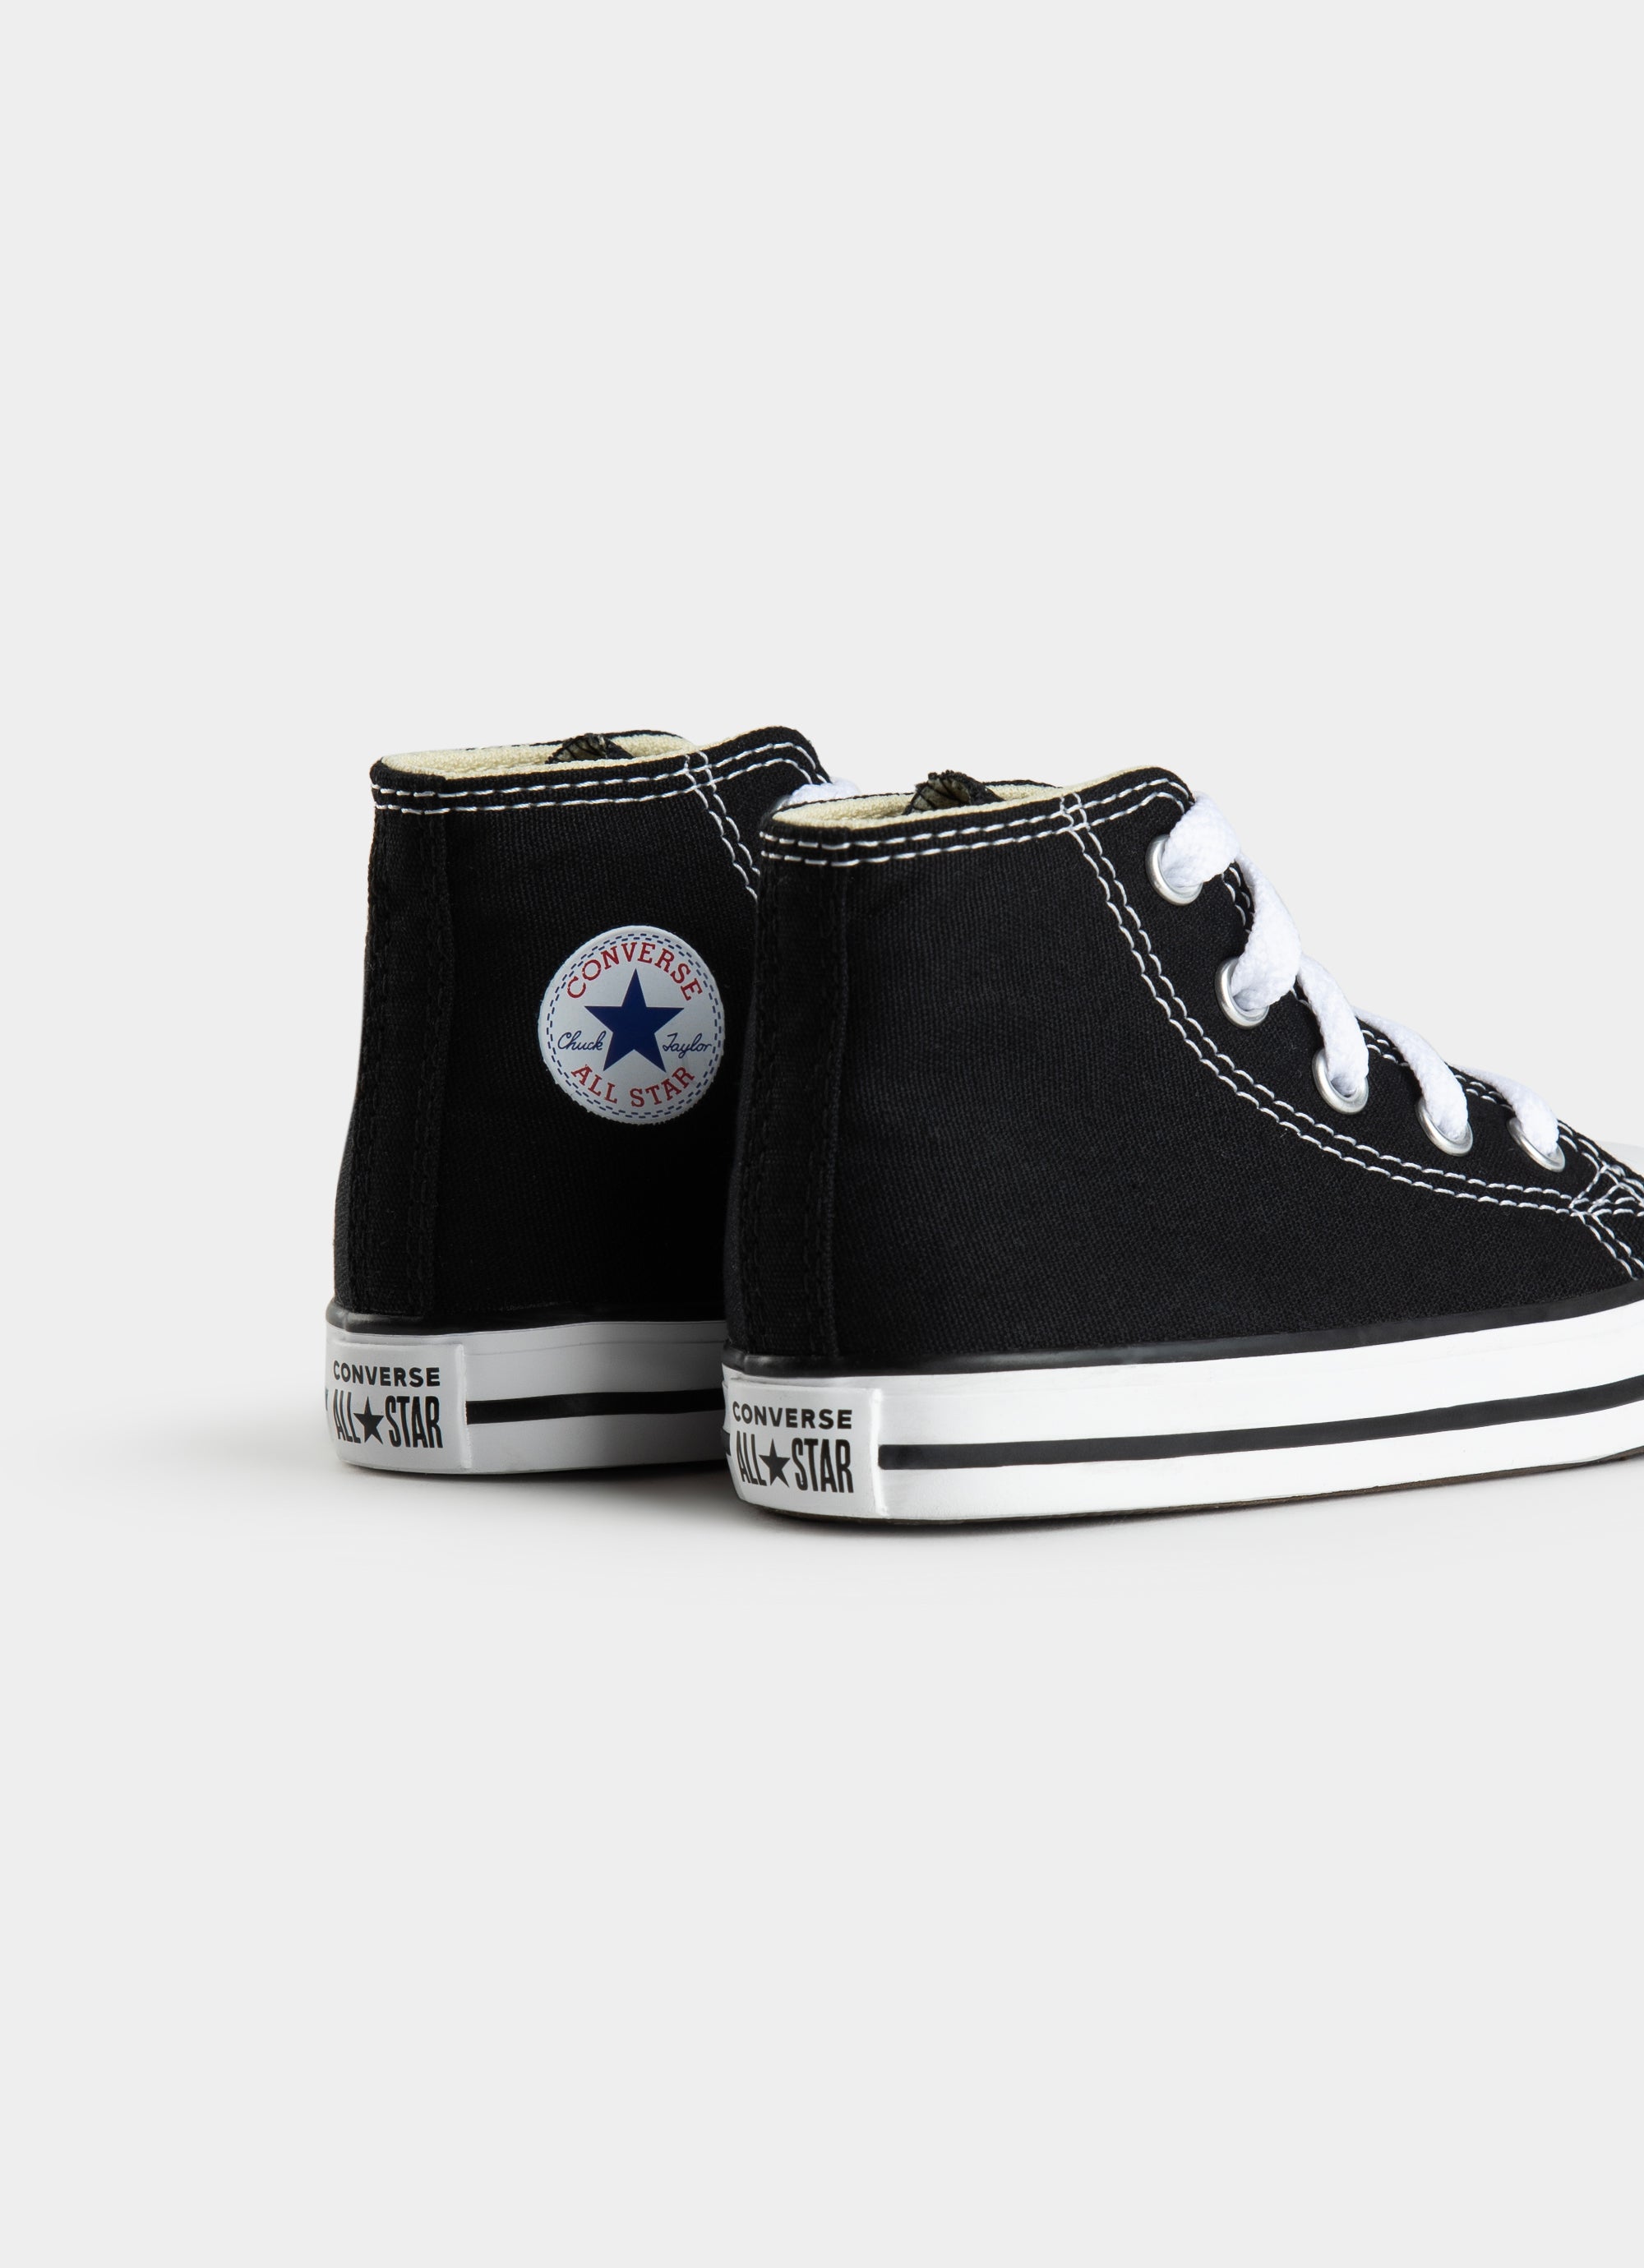 Converse Chuck Taylor All Star High Shoe - Toddler in Black | Red Rat